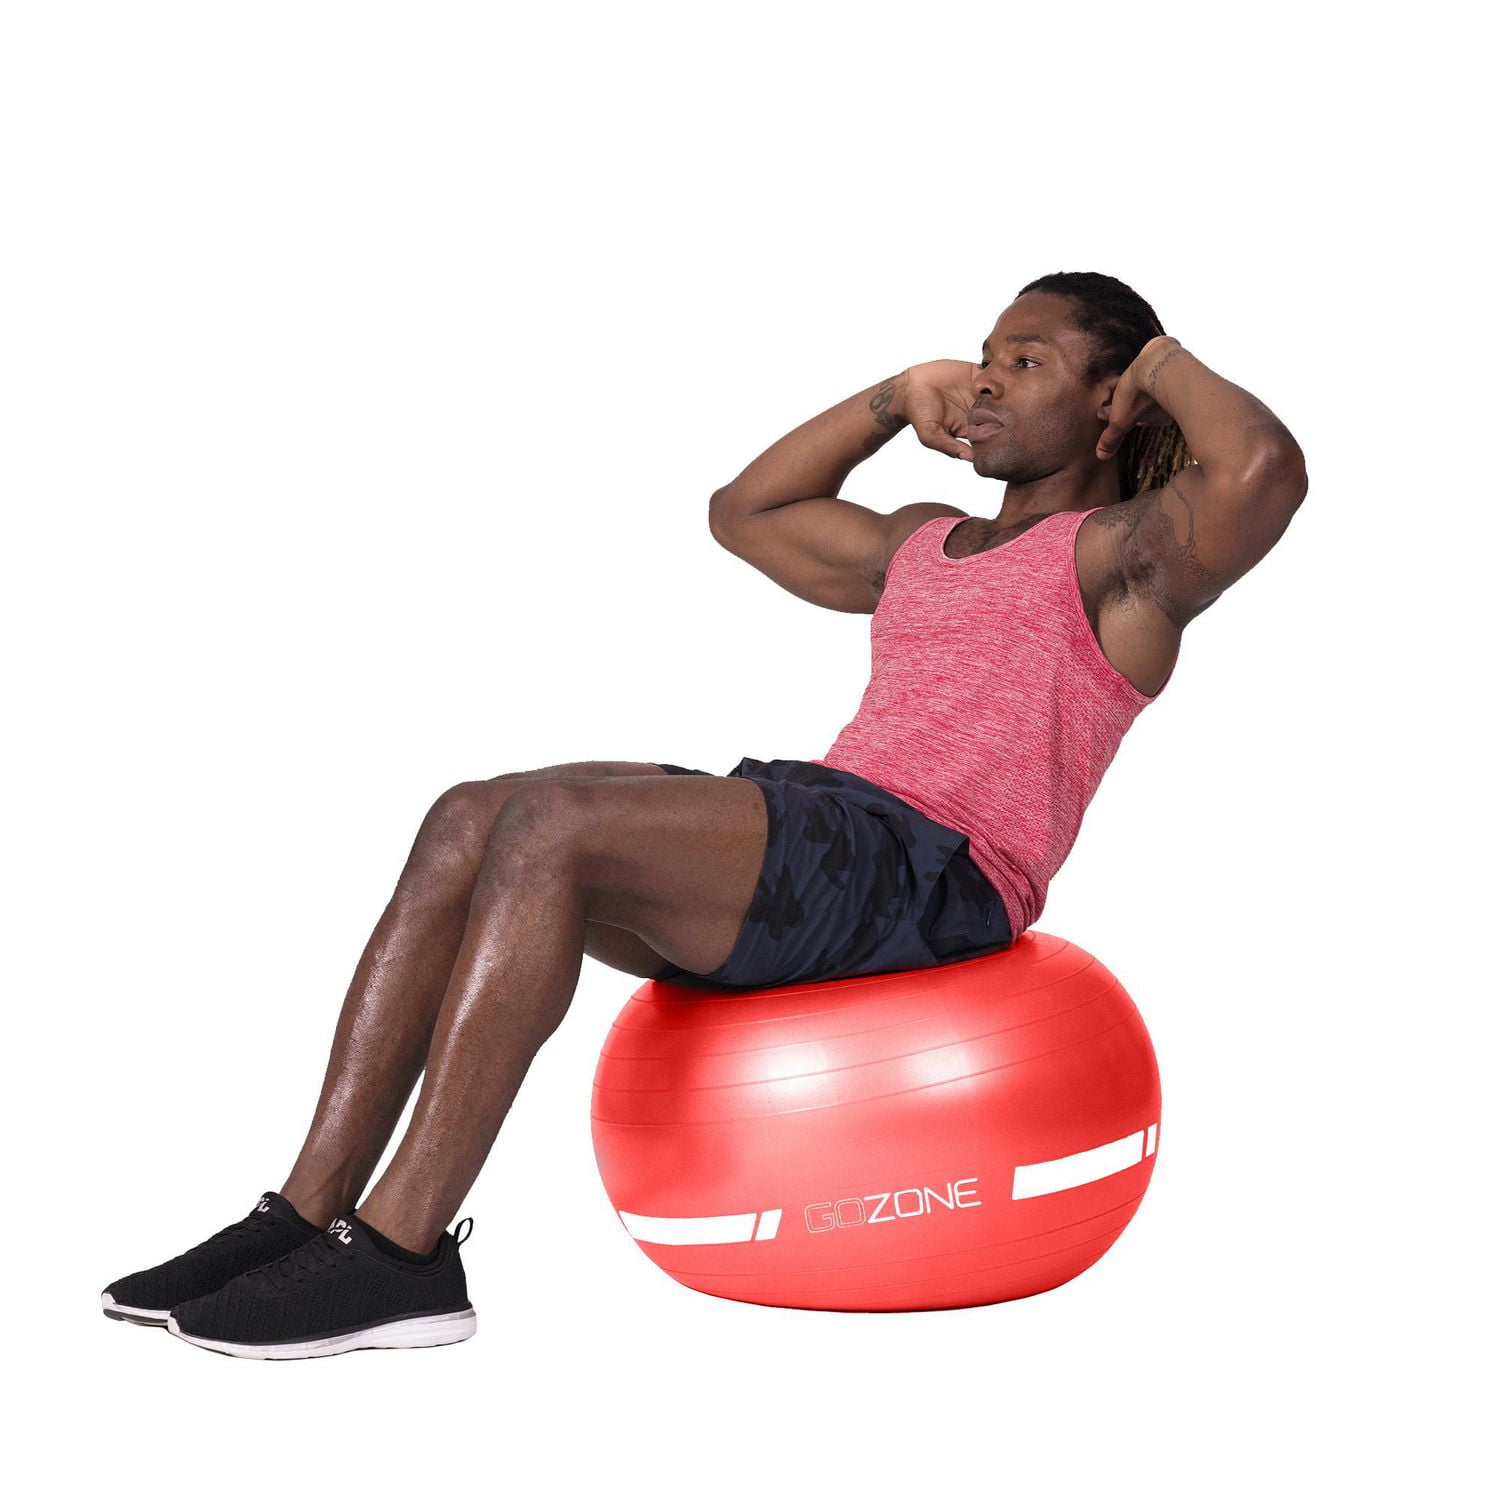 GoZone Exercise Ball, Hand pump included 